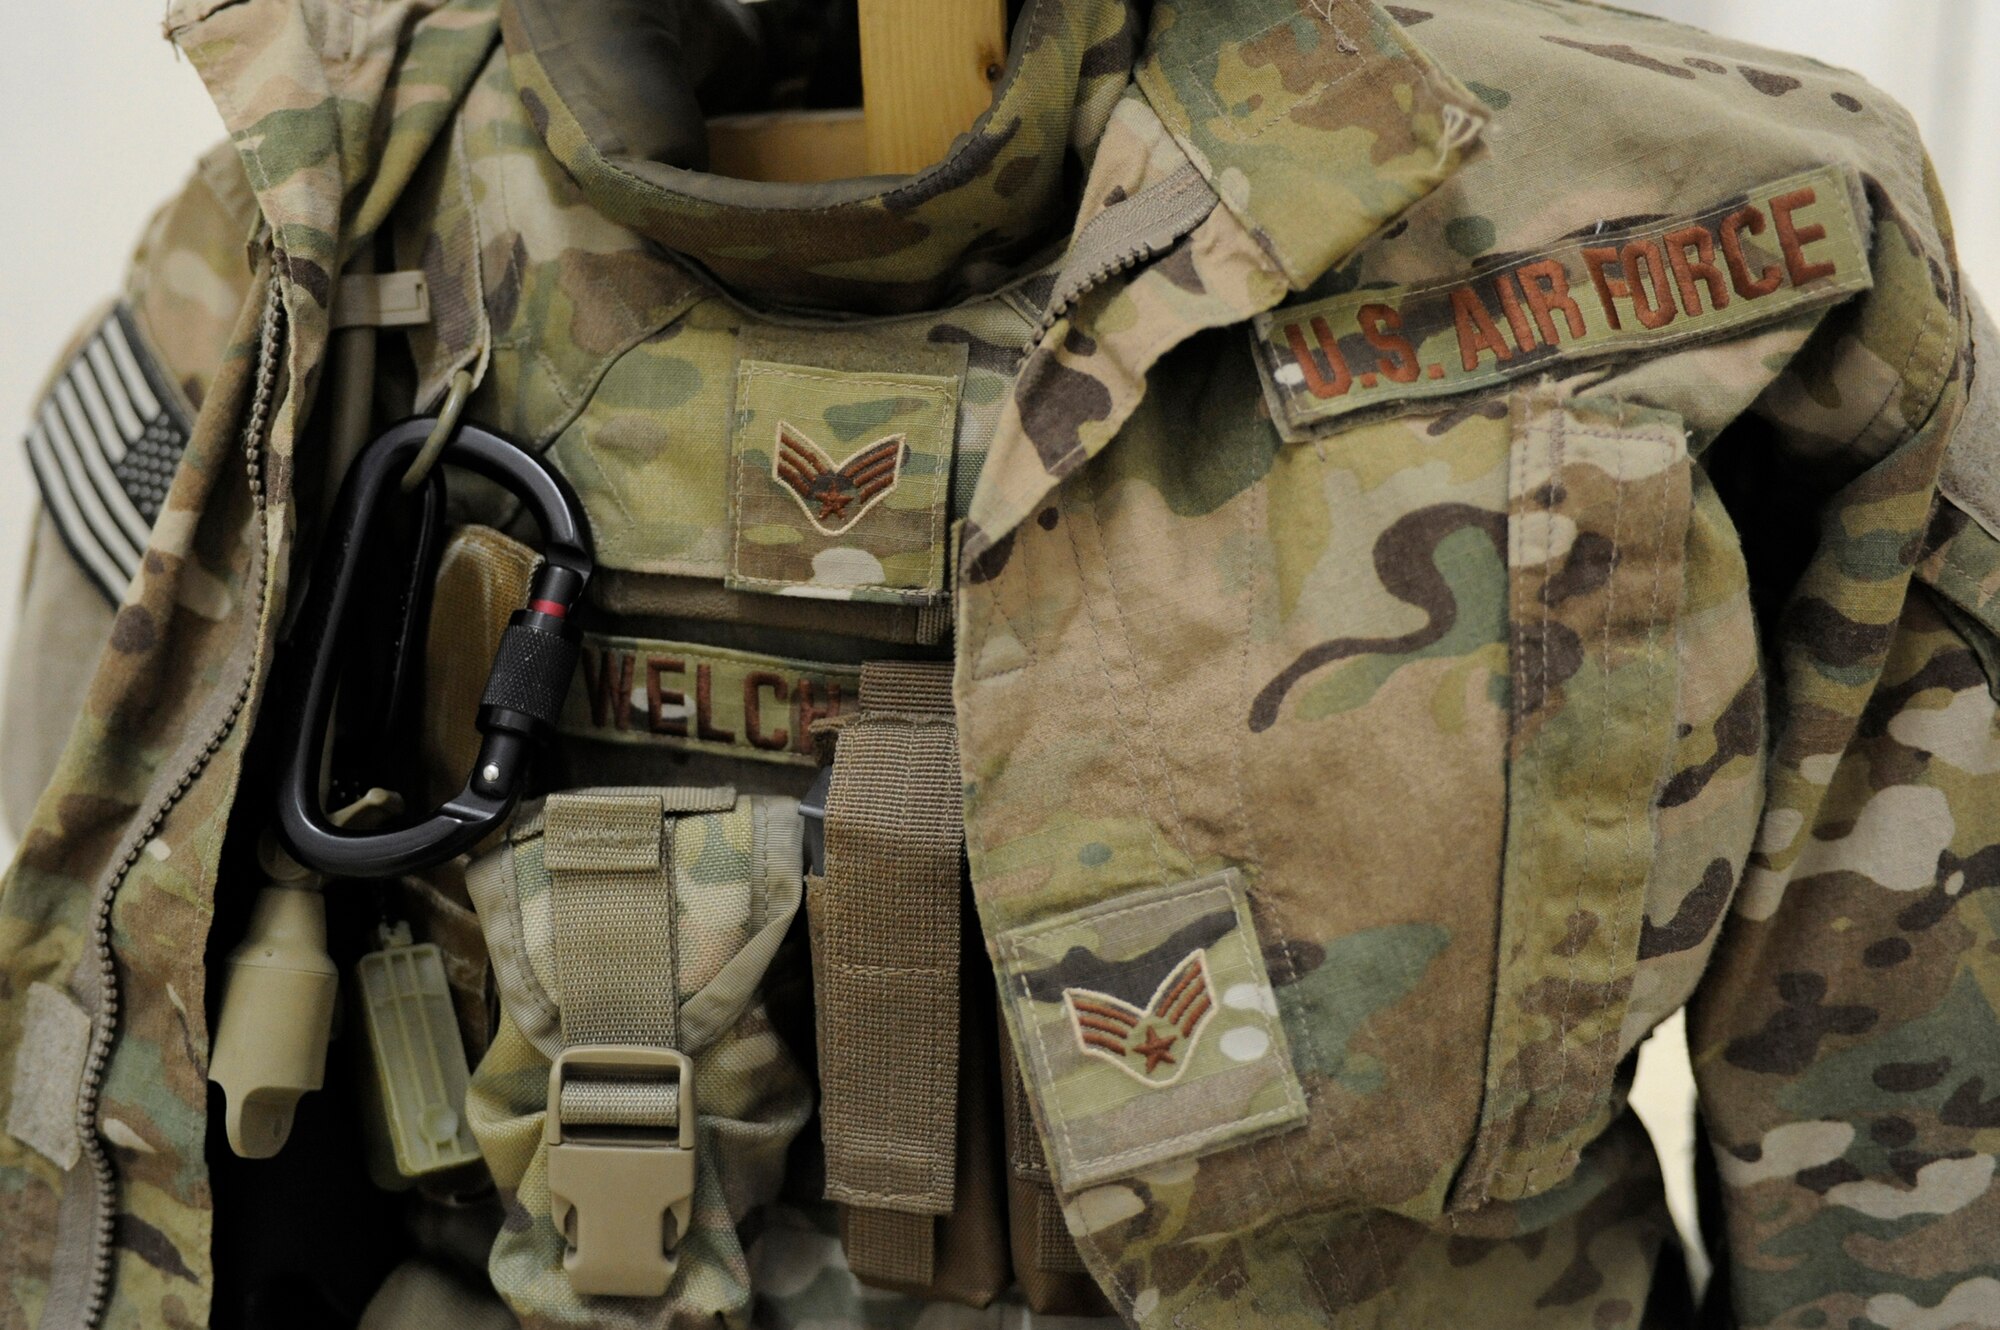 The Operation Enduring Freedom Camouflage Pattern, or OCP, uniform, also known as the "multi-cam," is the Air Force-designated uniform for Airmen performing "outside the wire" missions in Afghanistan.  Airmen wearing OCPs will stand out from their Army and Navy counterparts with "spice brown" colored name and service tapes and enlisted ranks.  (U.S. Air Force photo/Senior Airman Sandra Welch)